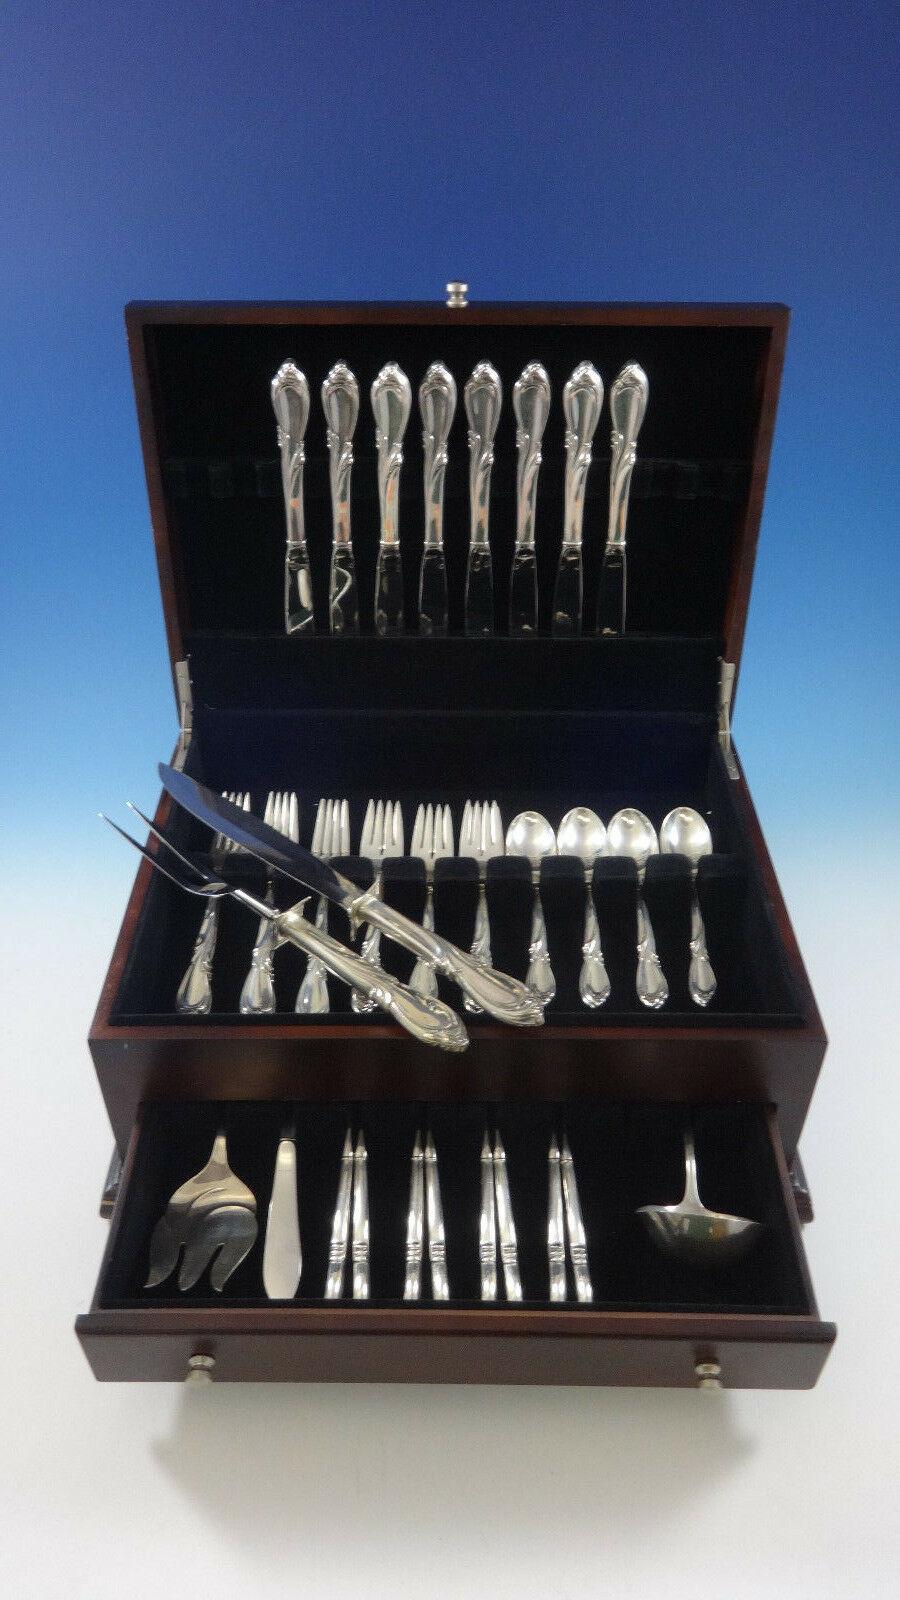 Rhapsody by International sterling silver flatware set - 44 pieces. This set includes:

8 knives, 9 1/4